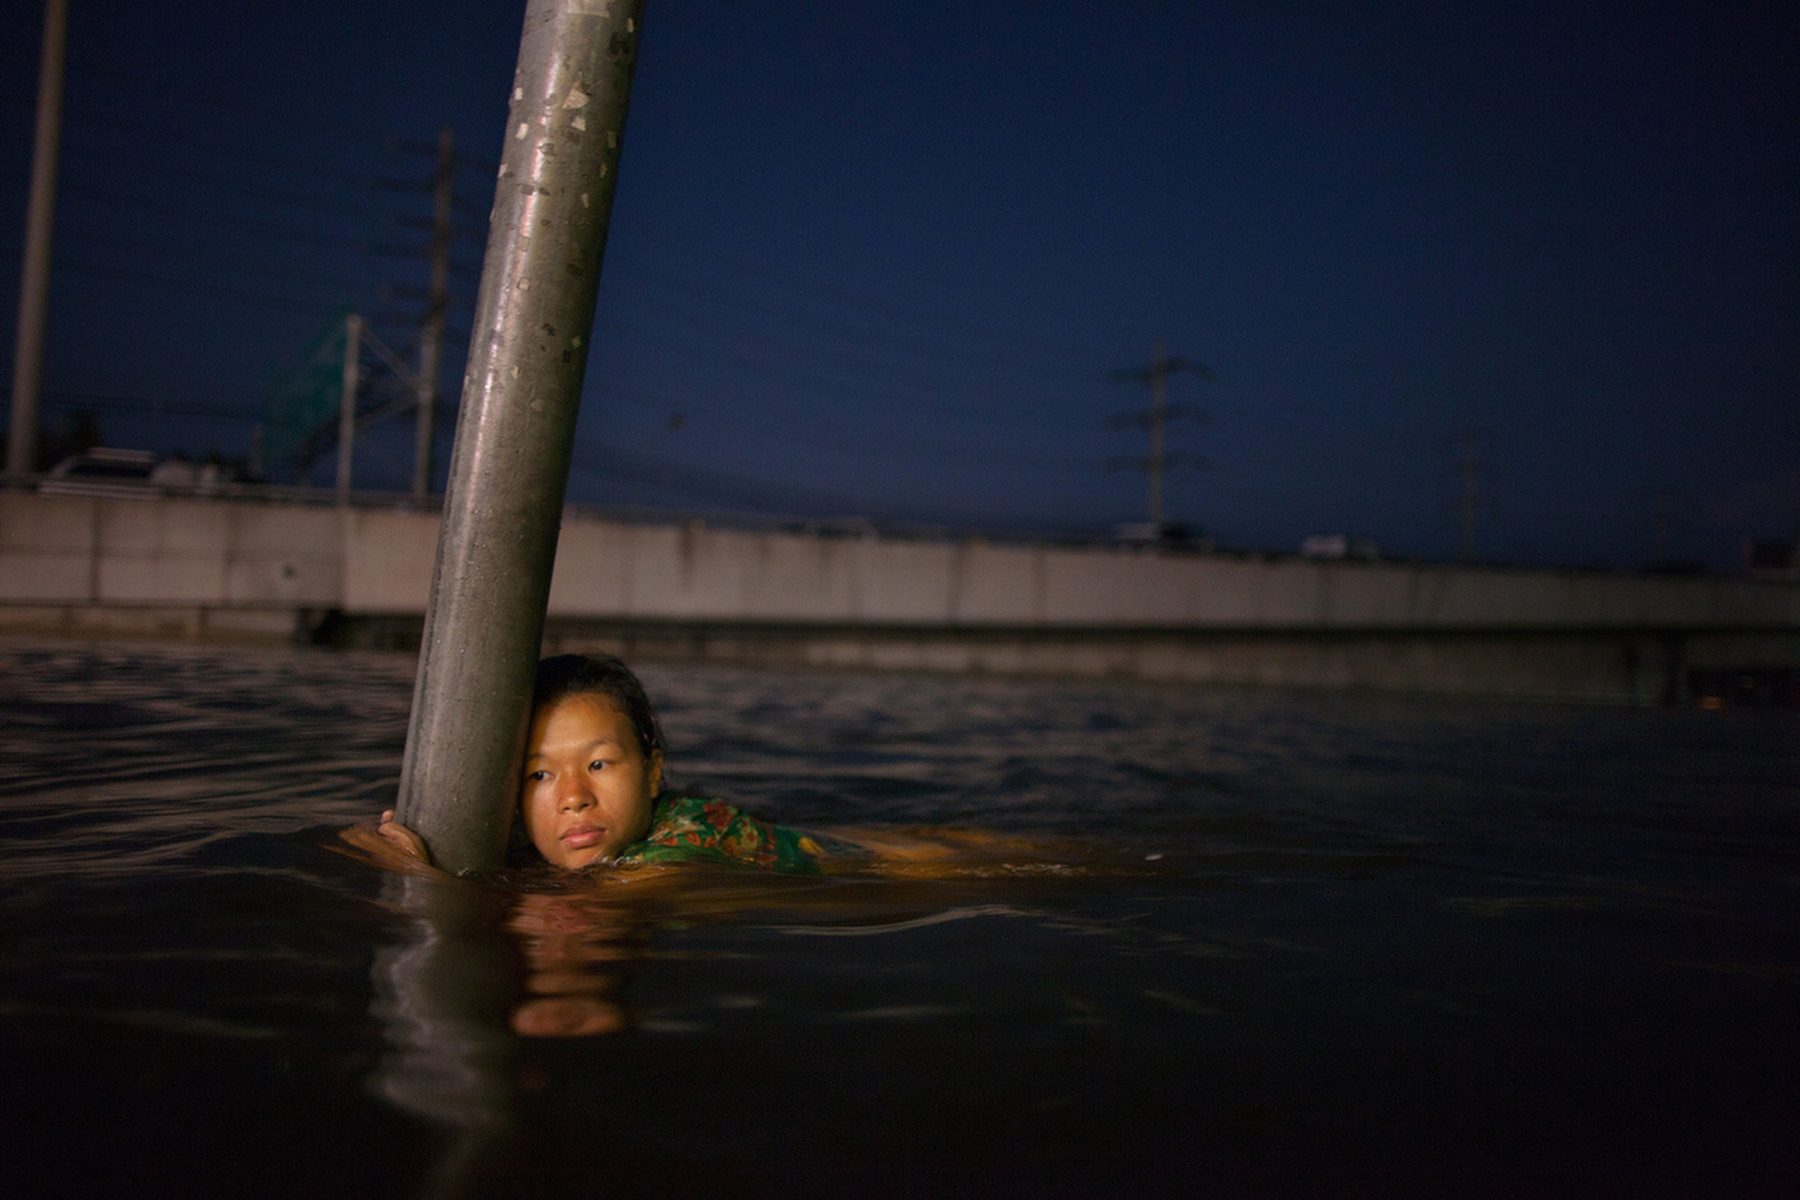 RANGSIT,THAILAND - OCTOBER 24rd: A woman hangs onto a street sign in chest deep water along the flooded streets in Rangsit on the outskirts of Bangkok October 24, 2011 in Bangkok, Thailand. Hundreds of factories closed in the central Thai province of Ayutthaya and Nonthaburi as the waters come closer to threaten Bangkok as well. Around 350 people have died in flood-related incidents since late July according to the Department of Disaster Prevention and Mitigation. Thailand is experiencing the worst flooding in 50 years with damages running as high as $6 billion which could increase of the floods swamp Bangkok.(Photo by Paula Bronstein /Getty Images)